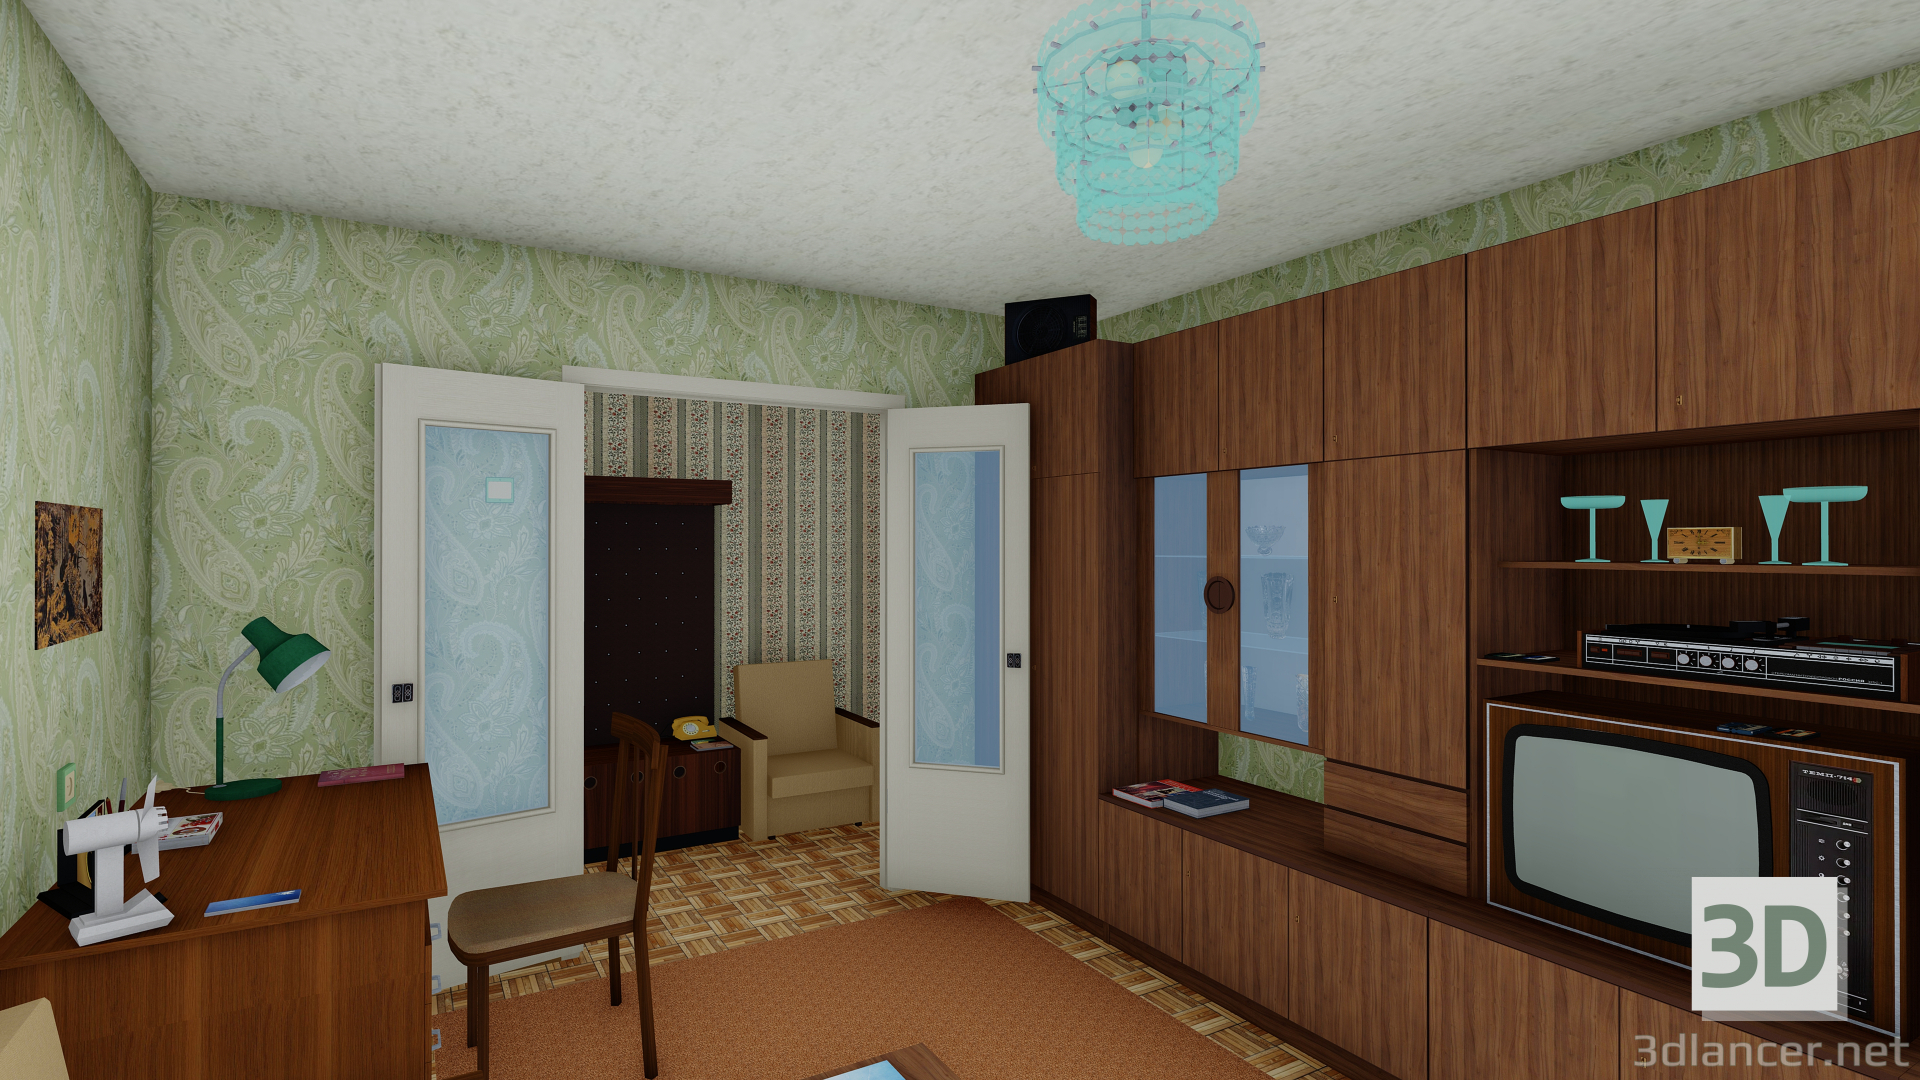 3d Panel five-story building with a Soviet apartment from the 80s model buy - render